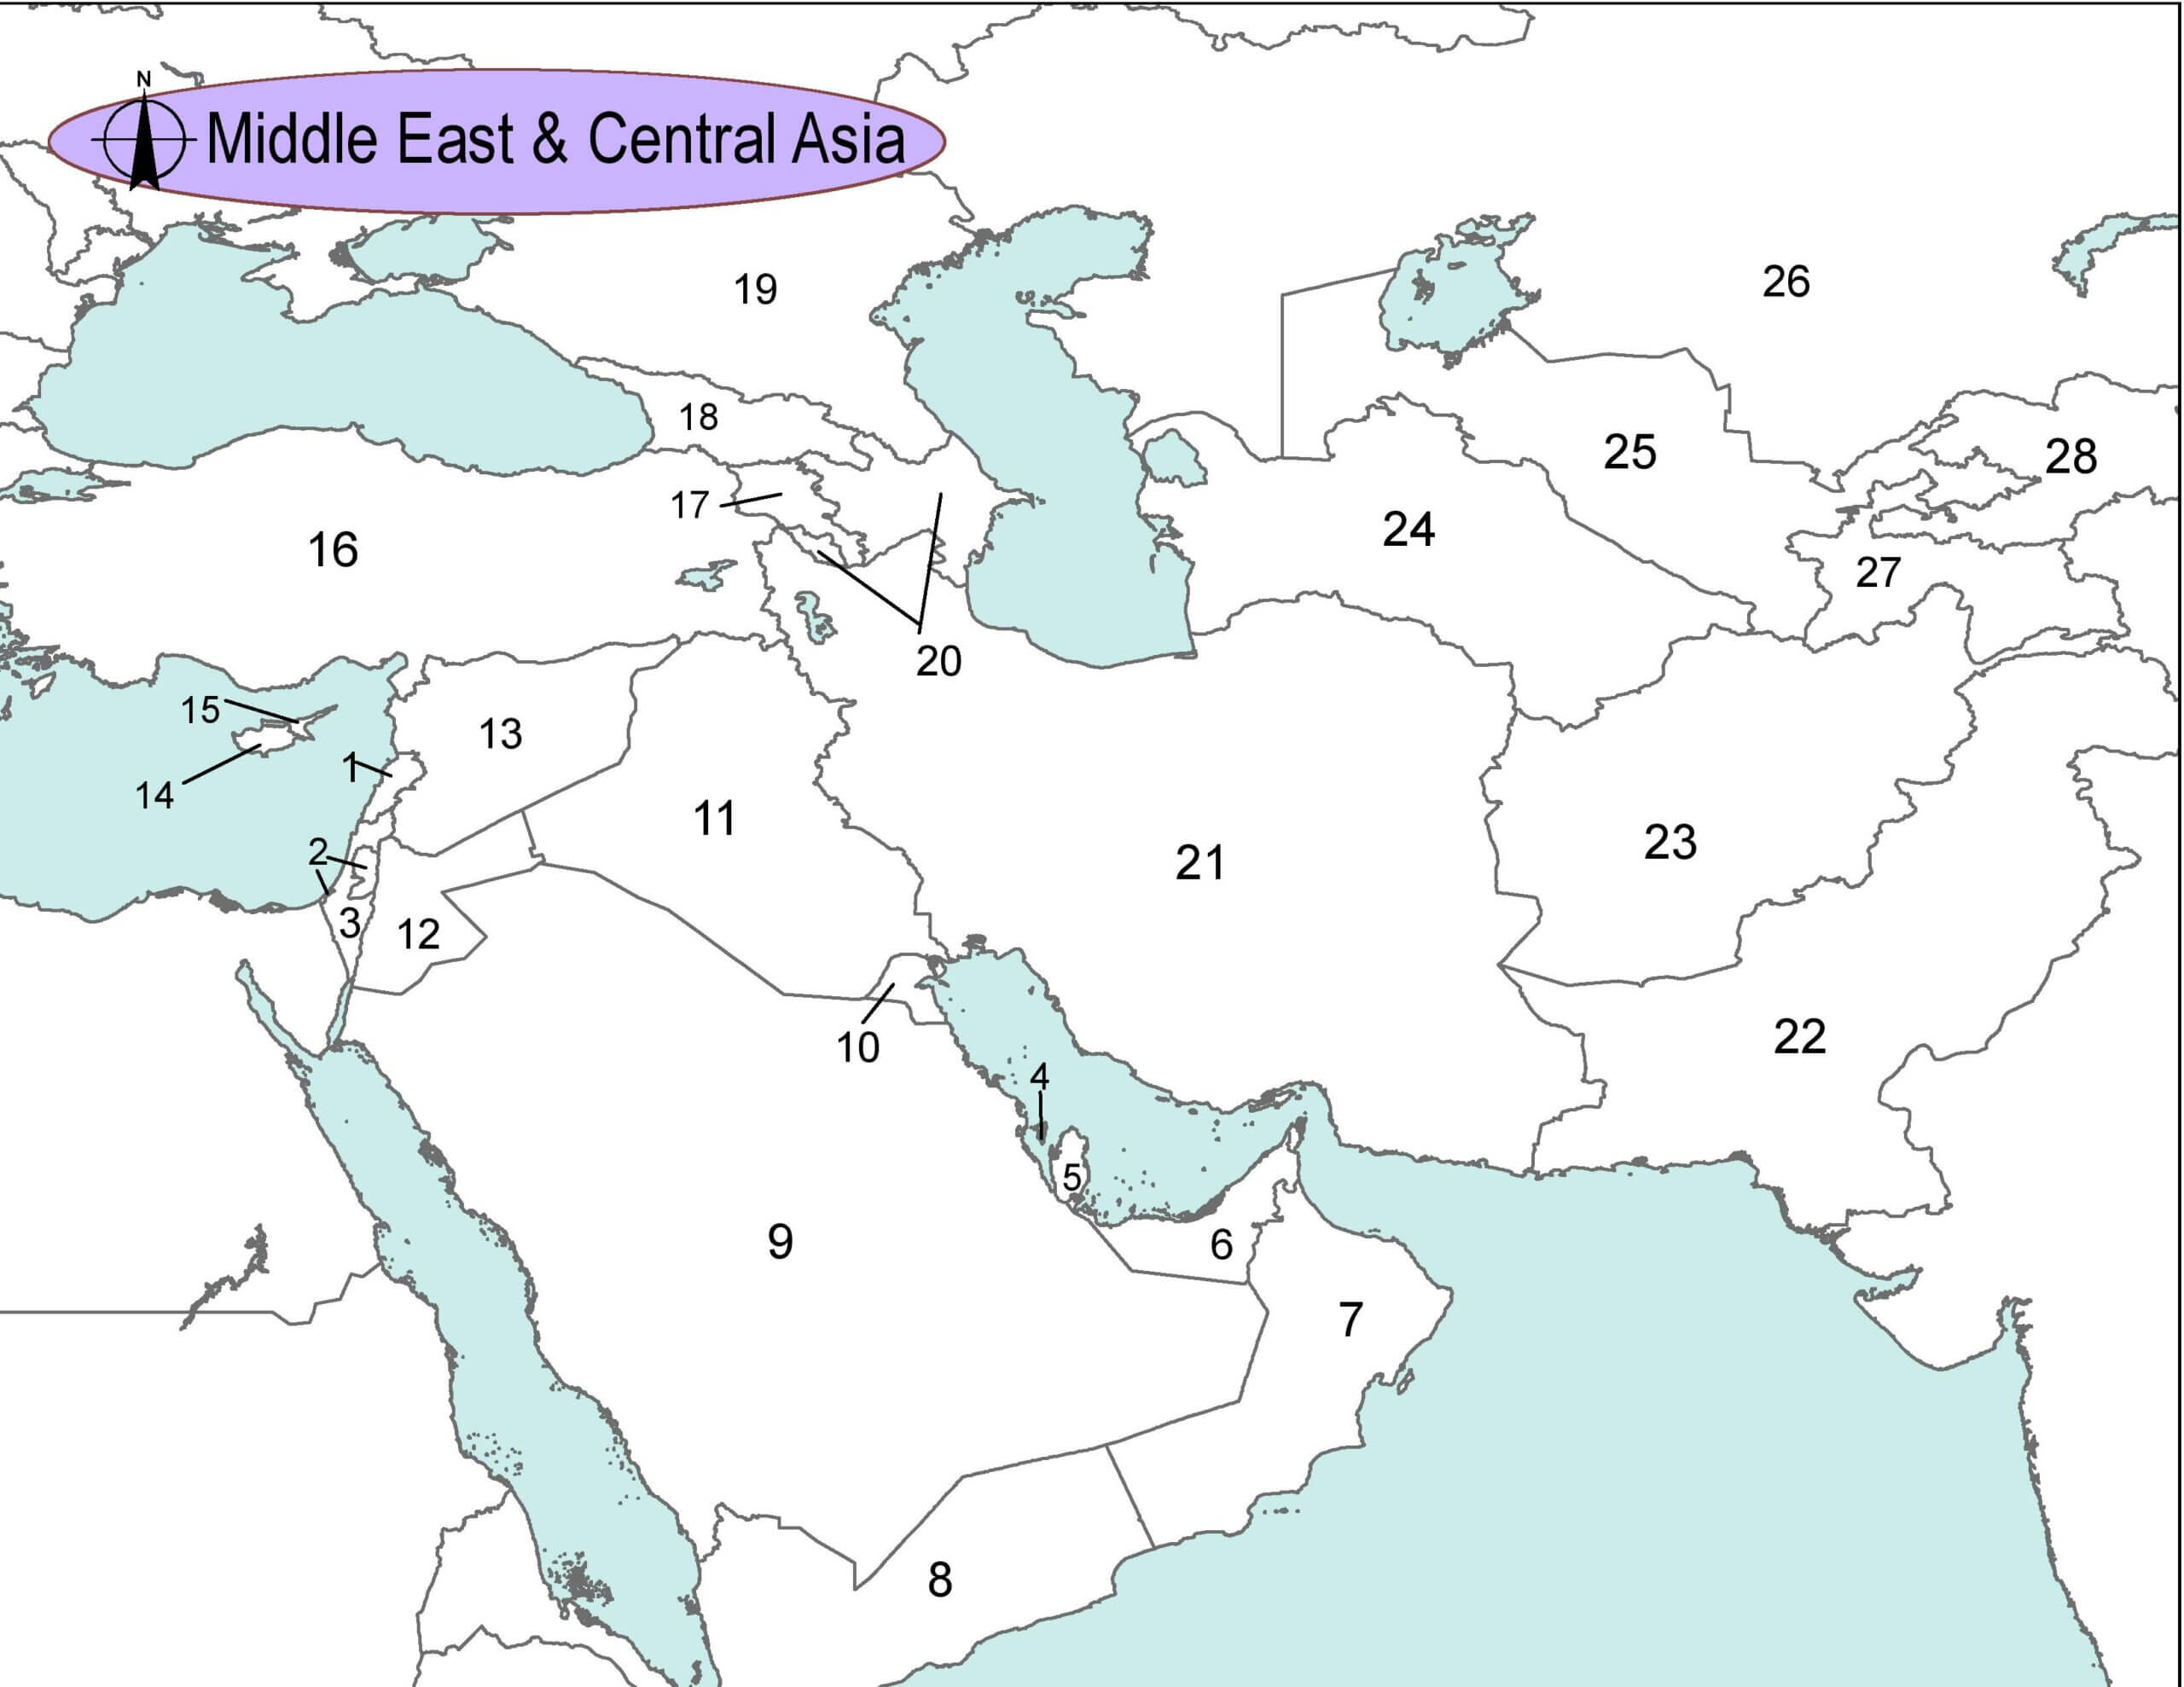 New Middle East & Central Asia Map - Numbers